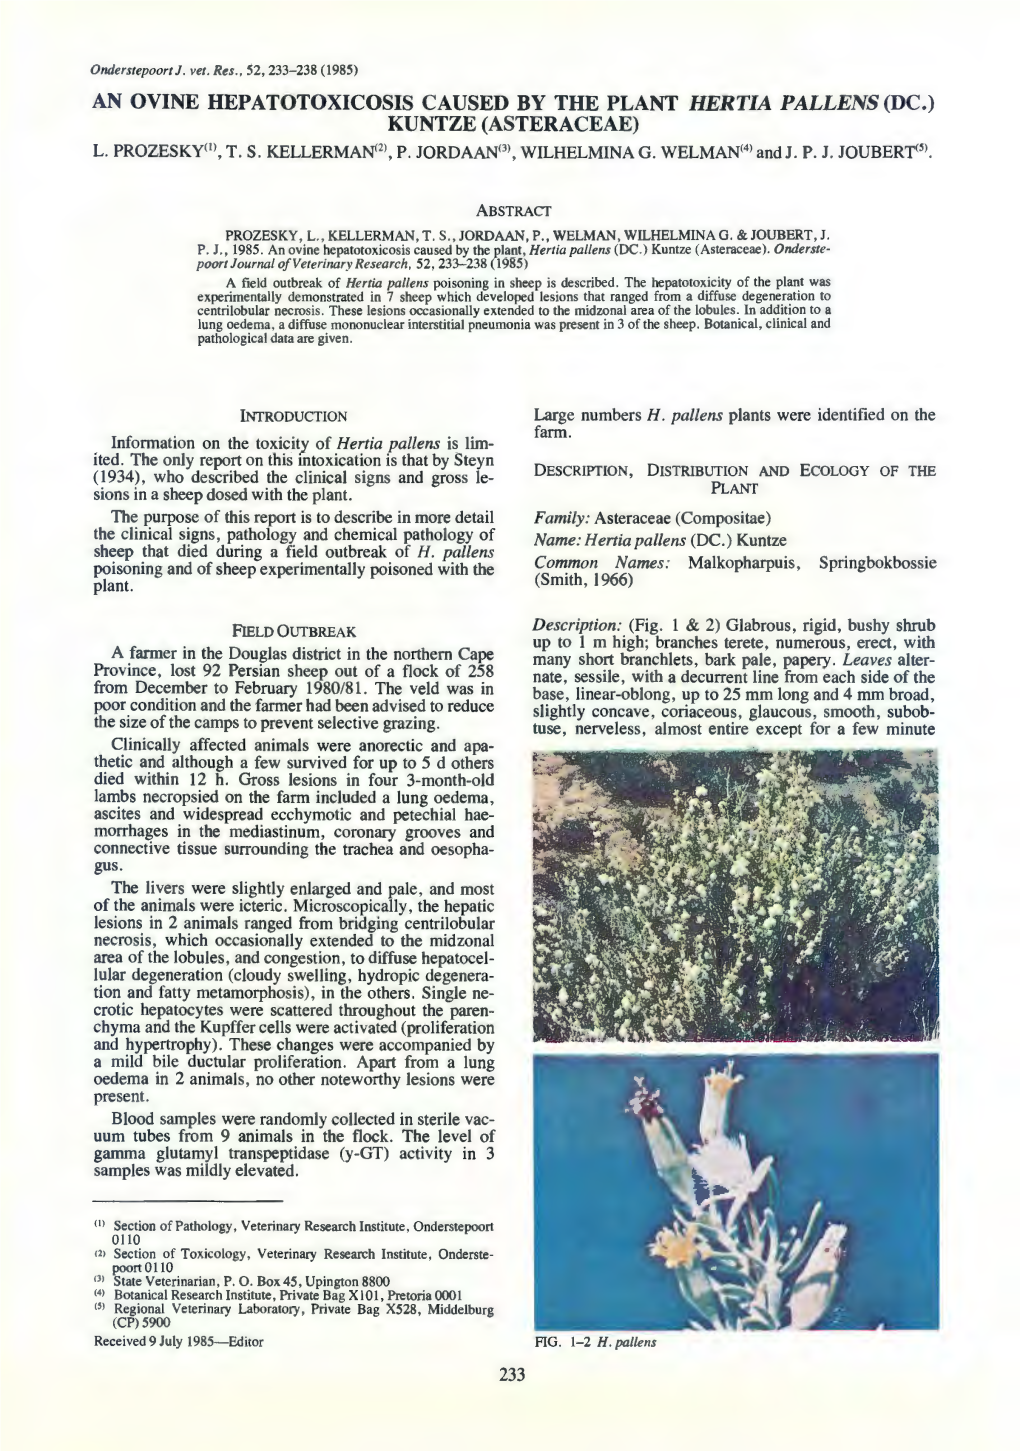 An Ovine Hepatotoxicosis Caused by the Plant Hertia Pallens(Dc.) Kuntze (Asteraceae) L